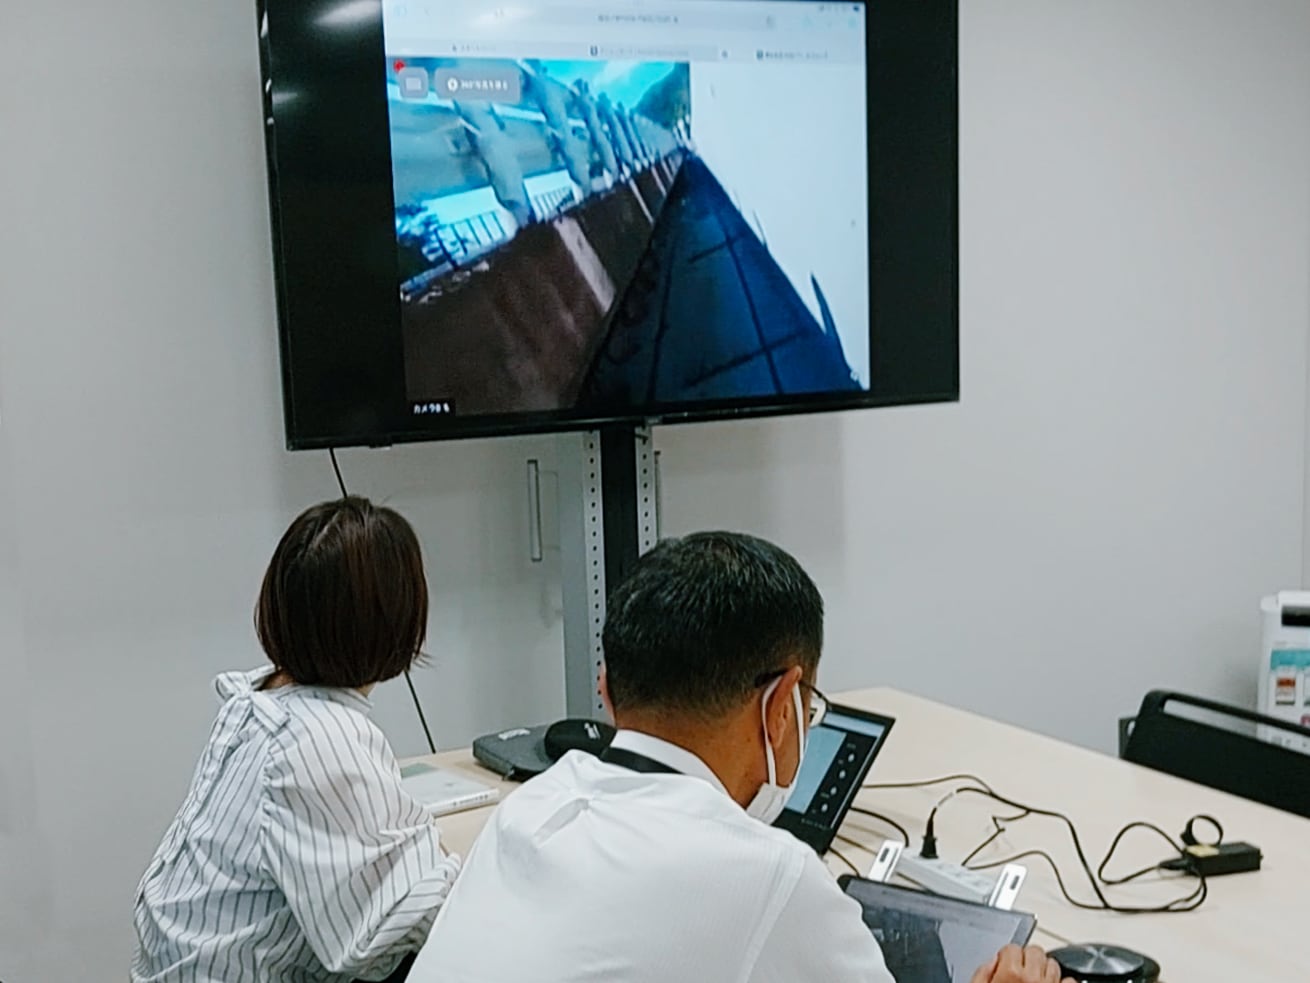 Remote participants watching from Sendai City, while people on the ground in Shiraishi City conduct a safety patrol with 360° video